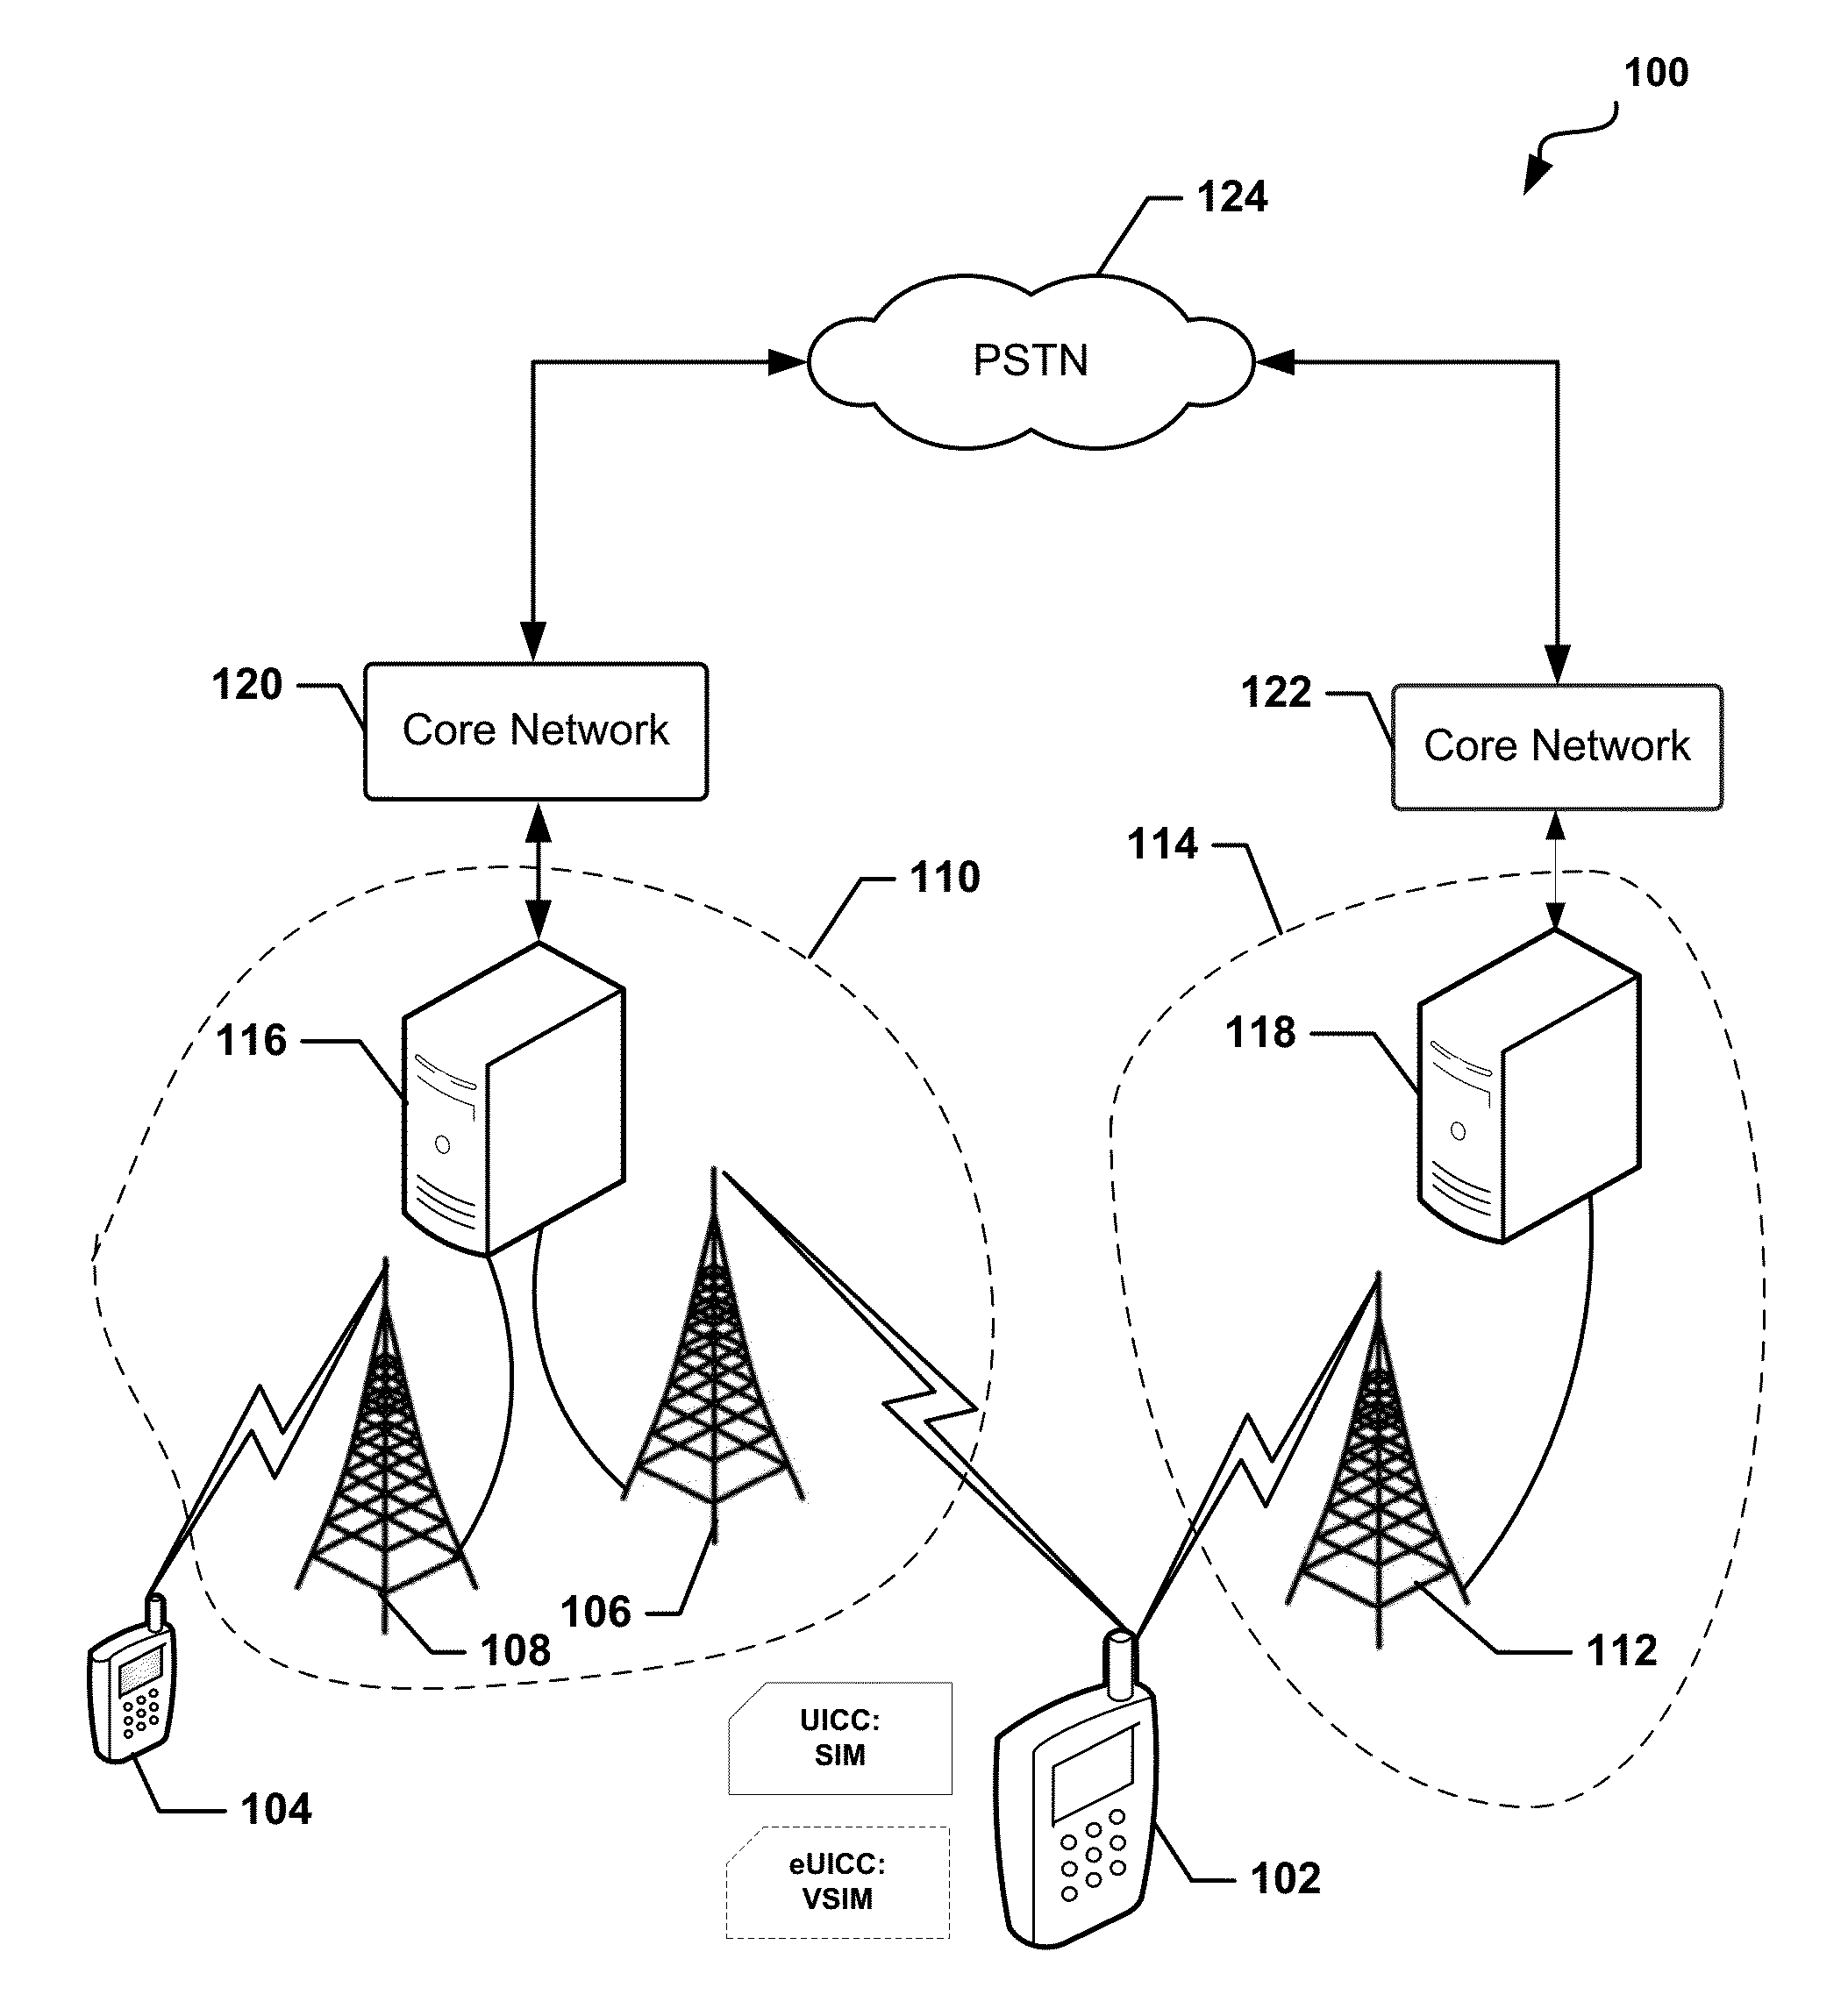 System and methods for dynamic SIM provisioning on a dual-SIM wireless communication device